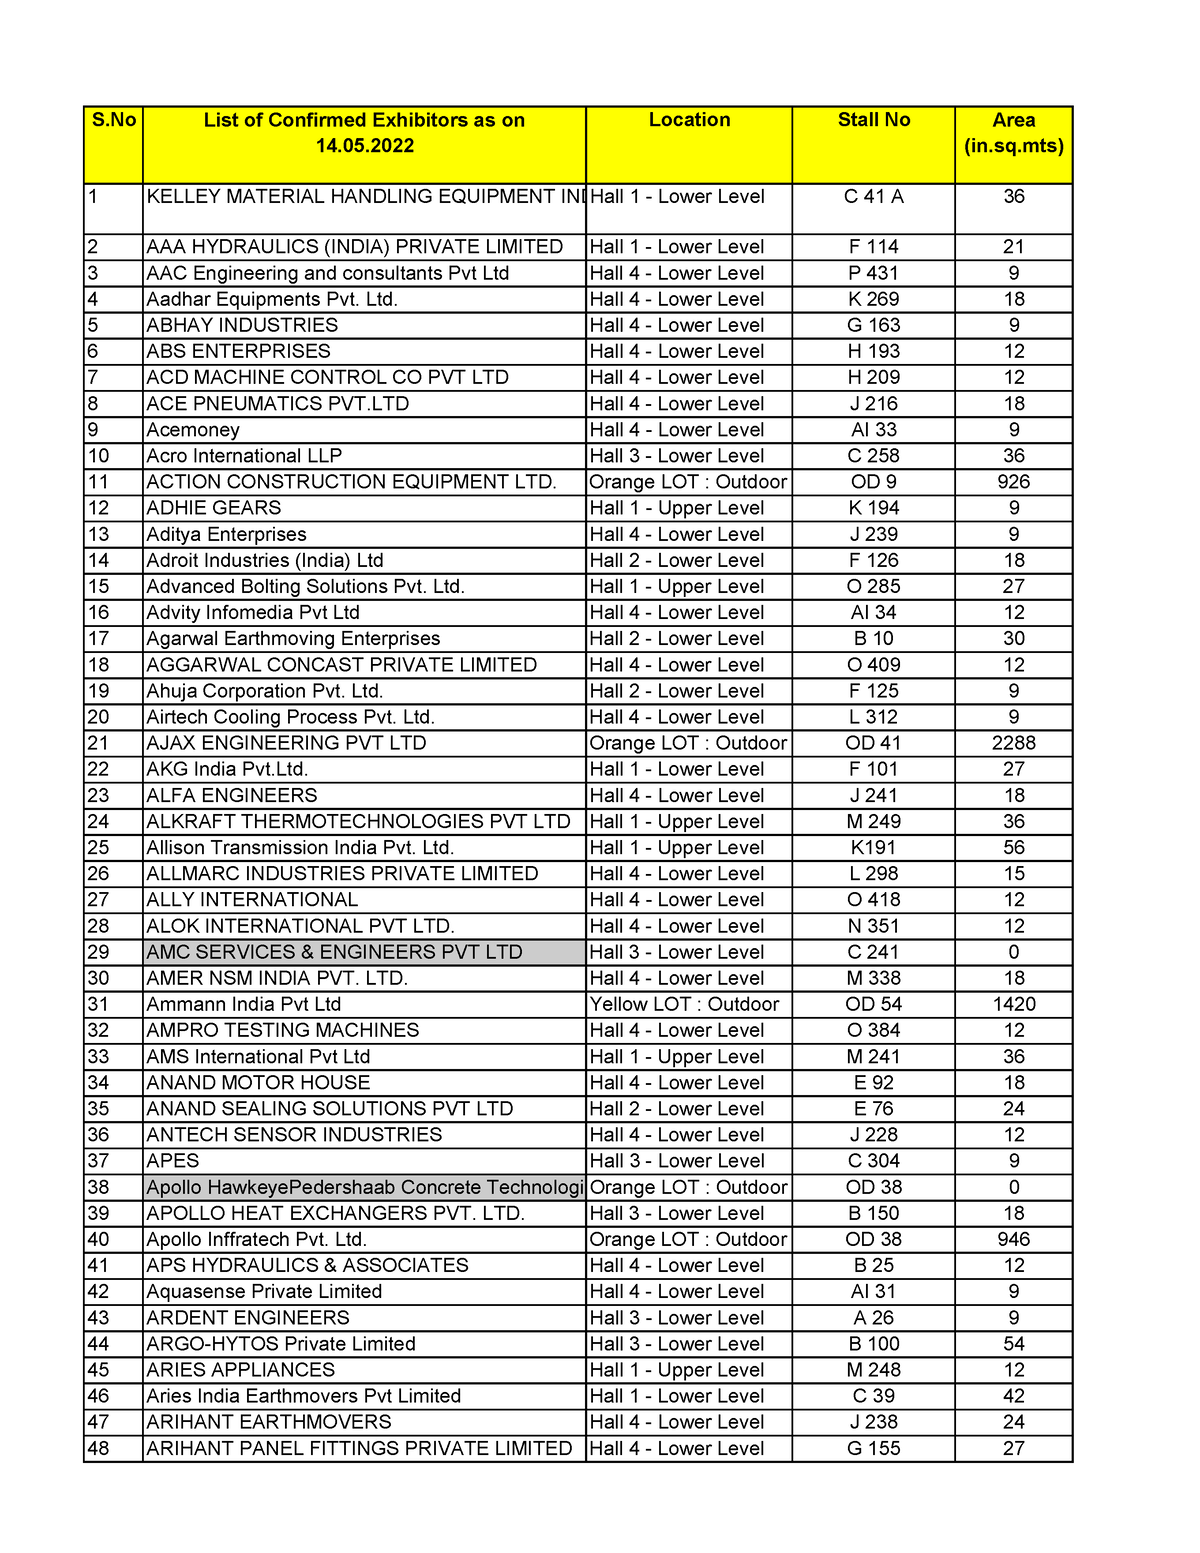 Acetech Mumbai exhibitors S List of Confirmed Exhibitors as on